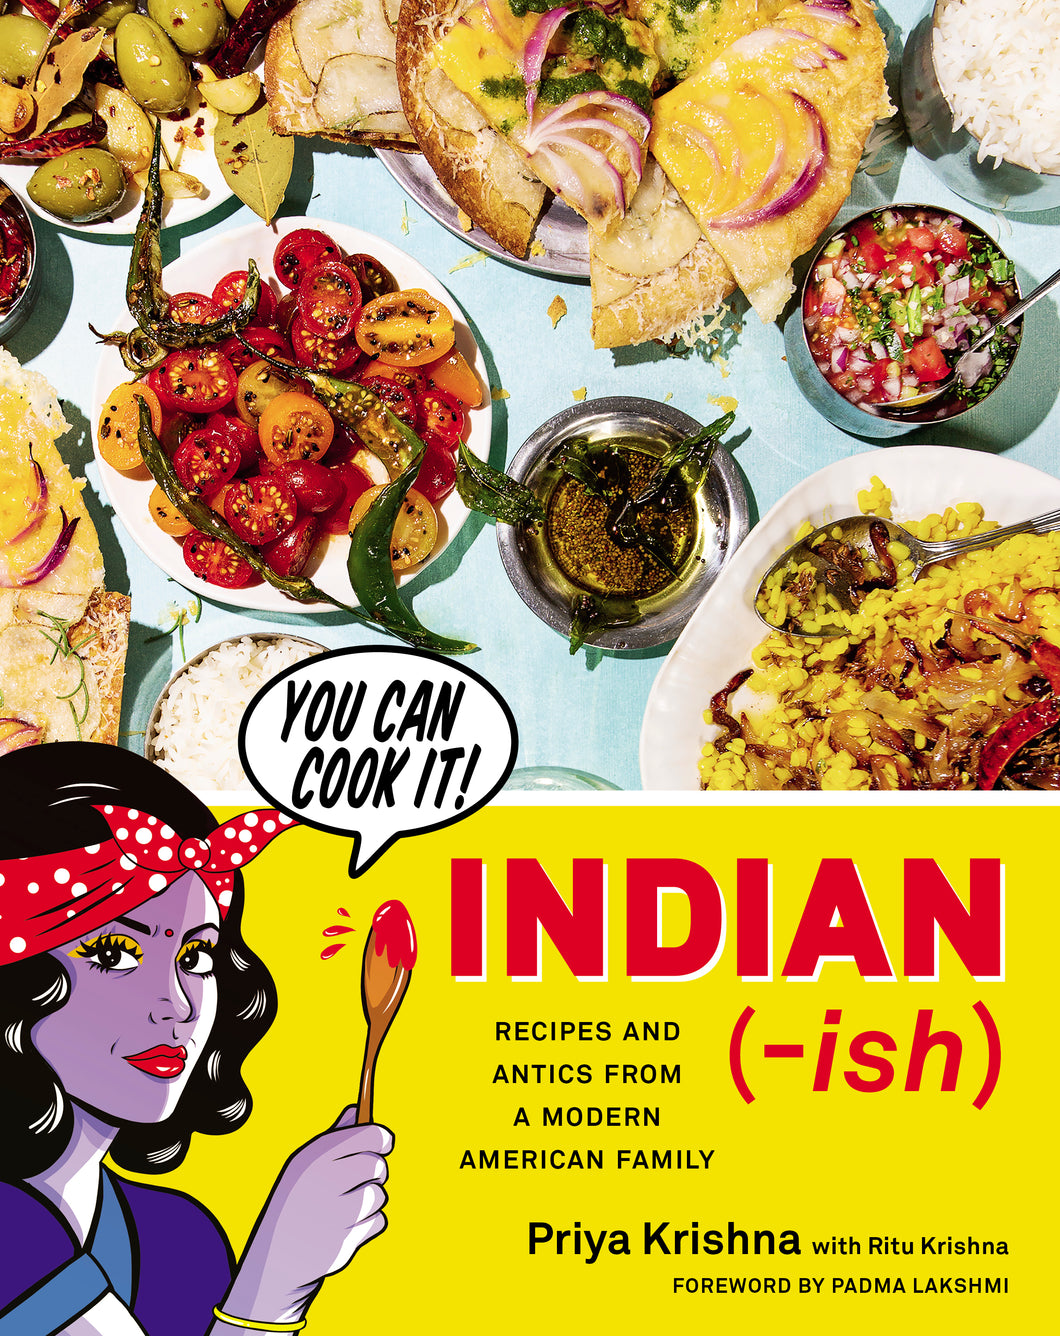 Indian (-ish): Recipes and Antics from a Modern American Family